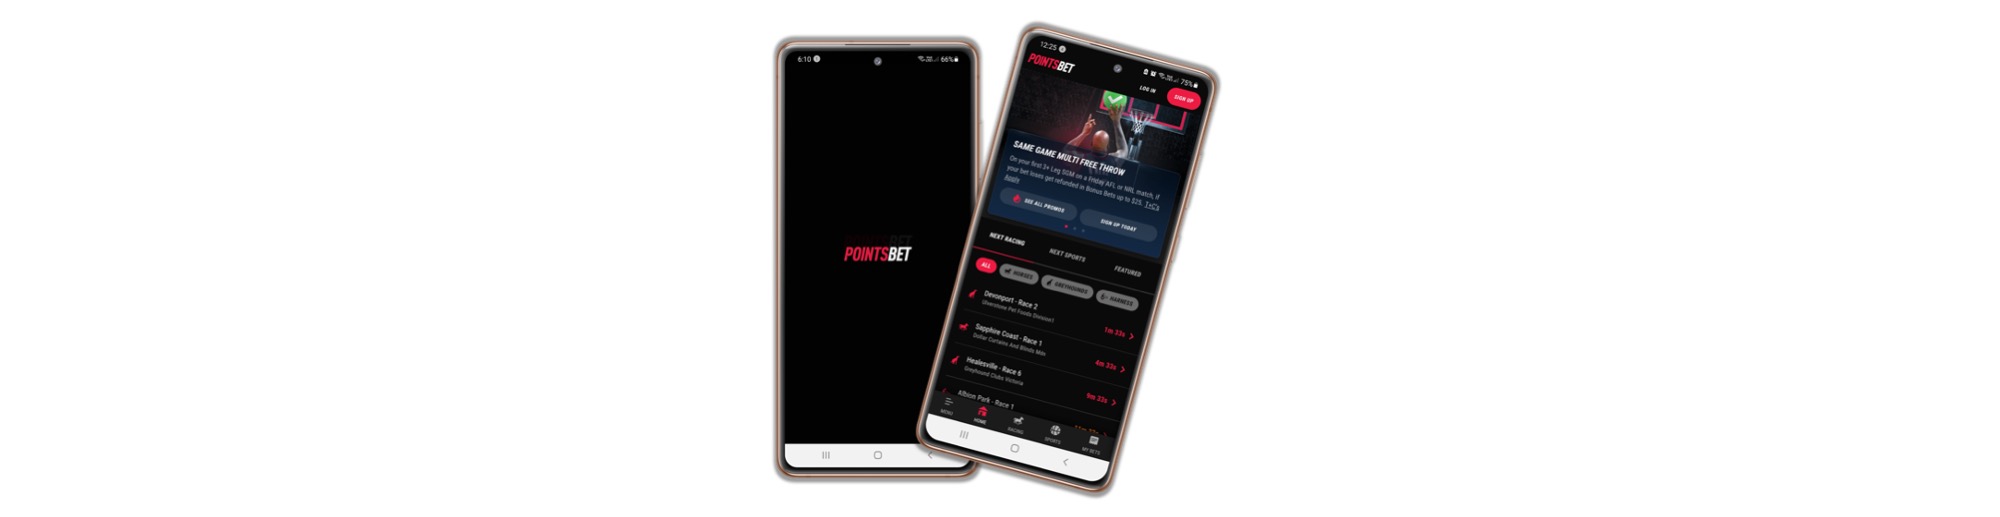 Pointsbet App Android